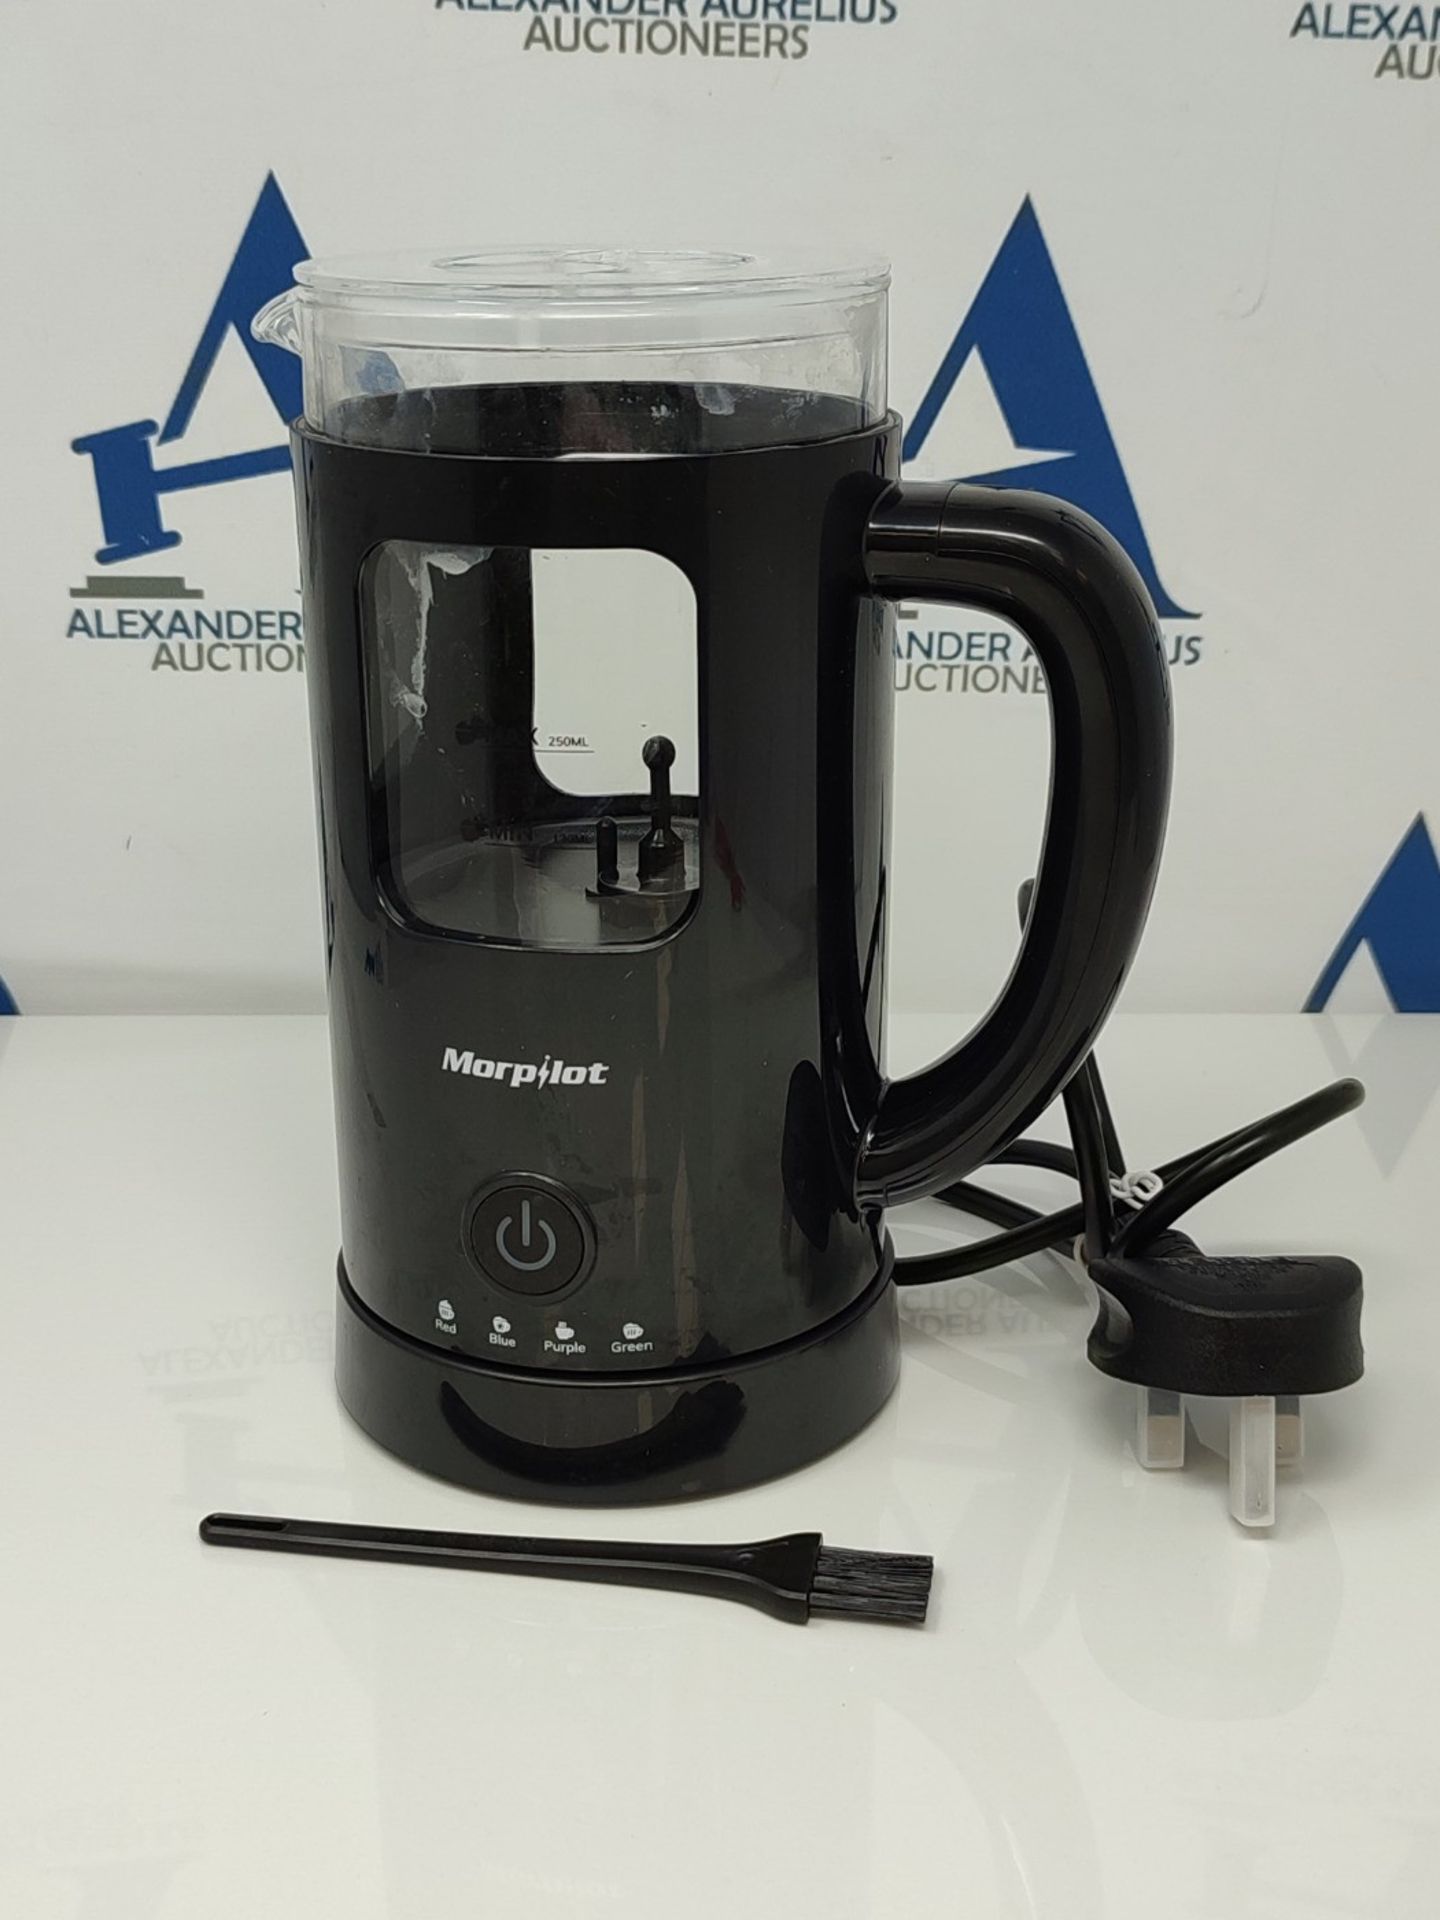 Milk Frother, Morpilot 4 in 1 Automatic Coffee Frother, Glass Material, 600ml Large Ca - Image 2 of 2